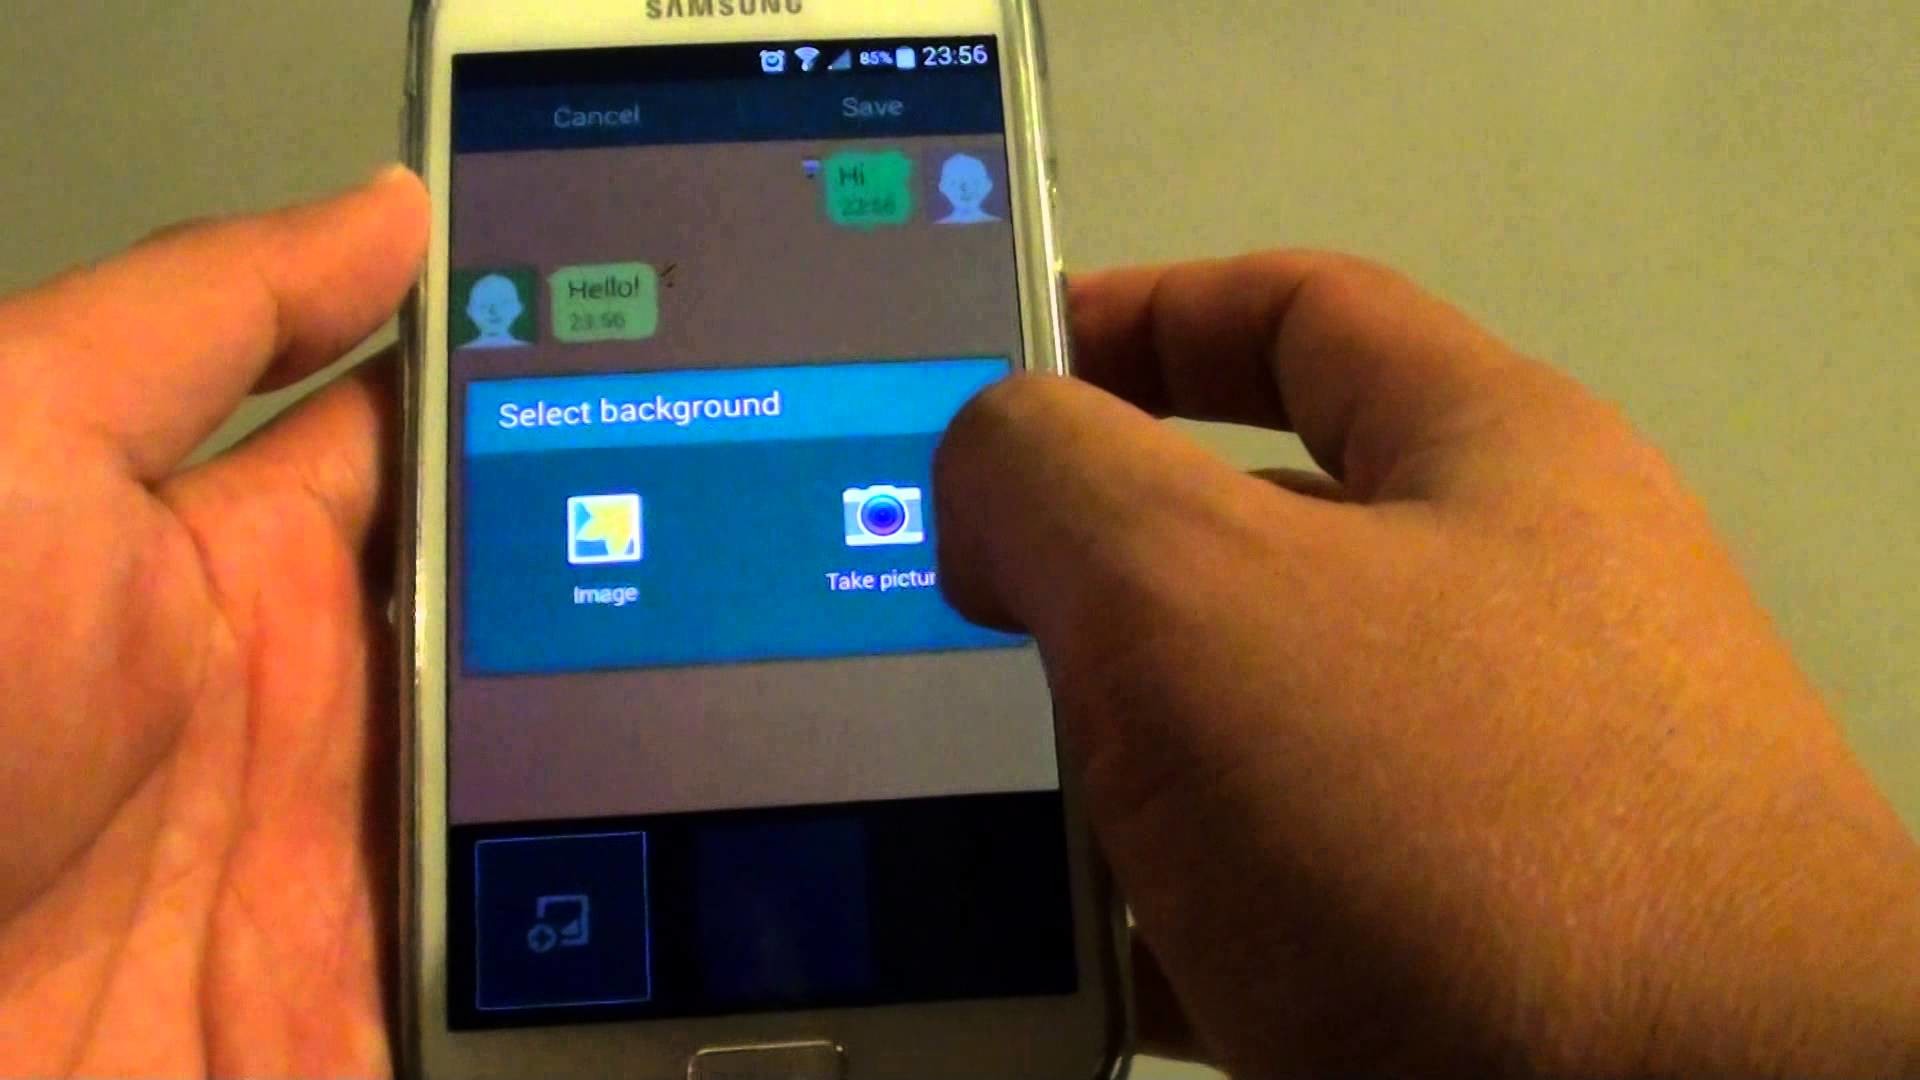 1920x1080 Samsung Galaxy S5: How to Change Text Messages Background Style - YouTube